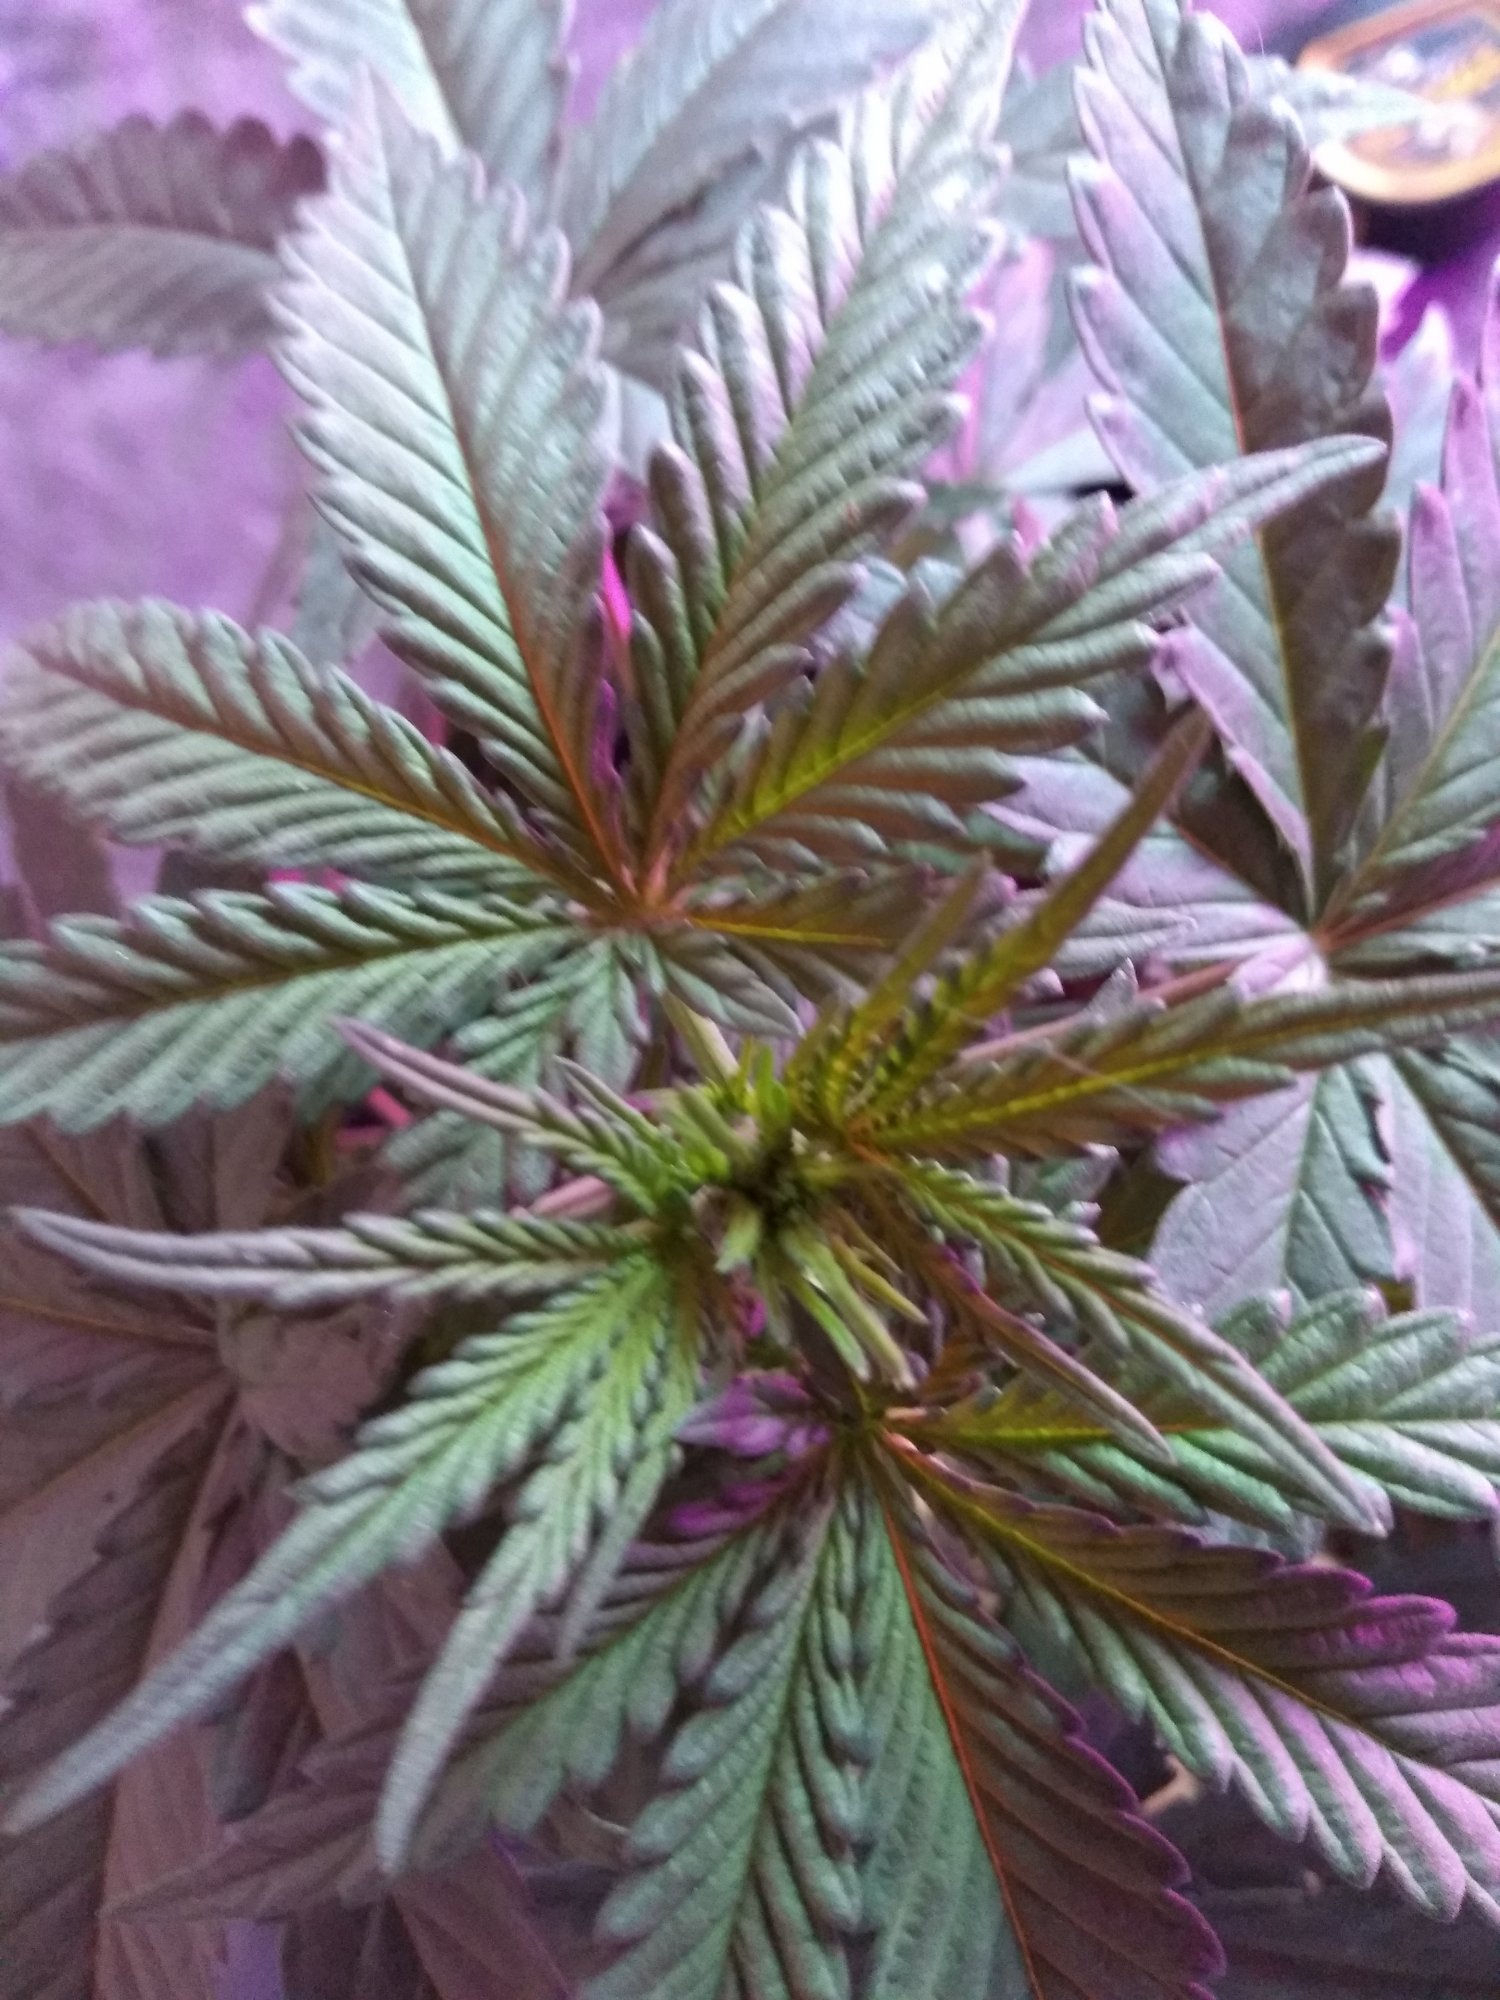 New grower   mistakes have been made 6